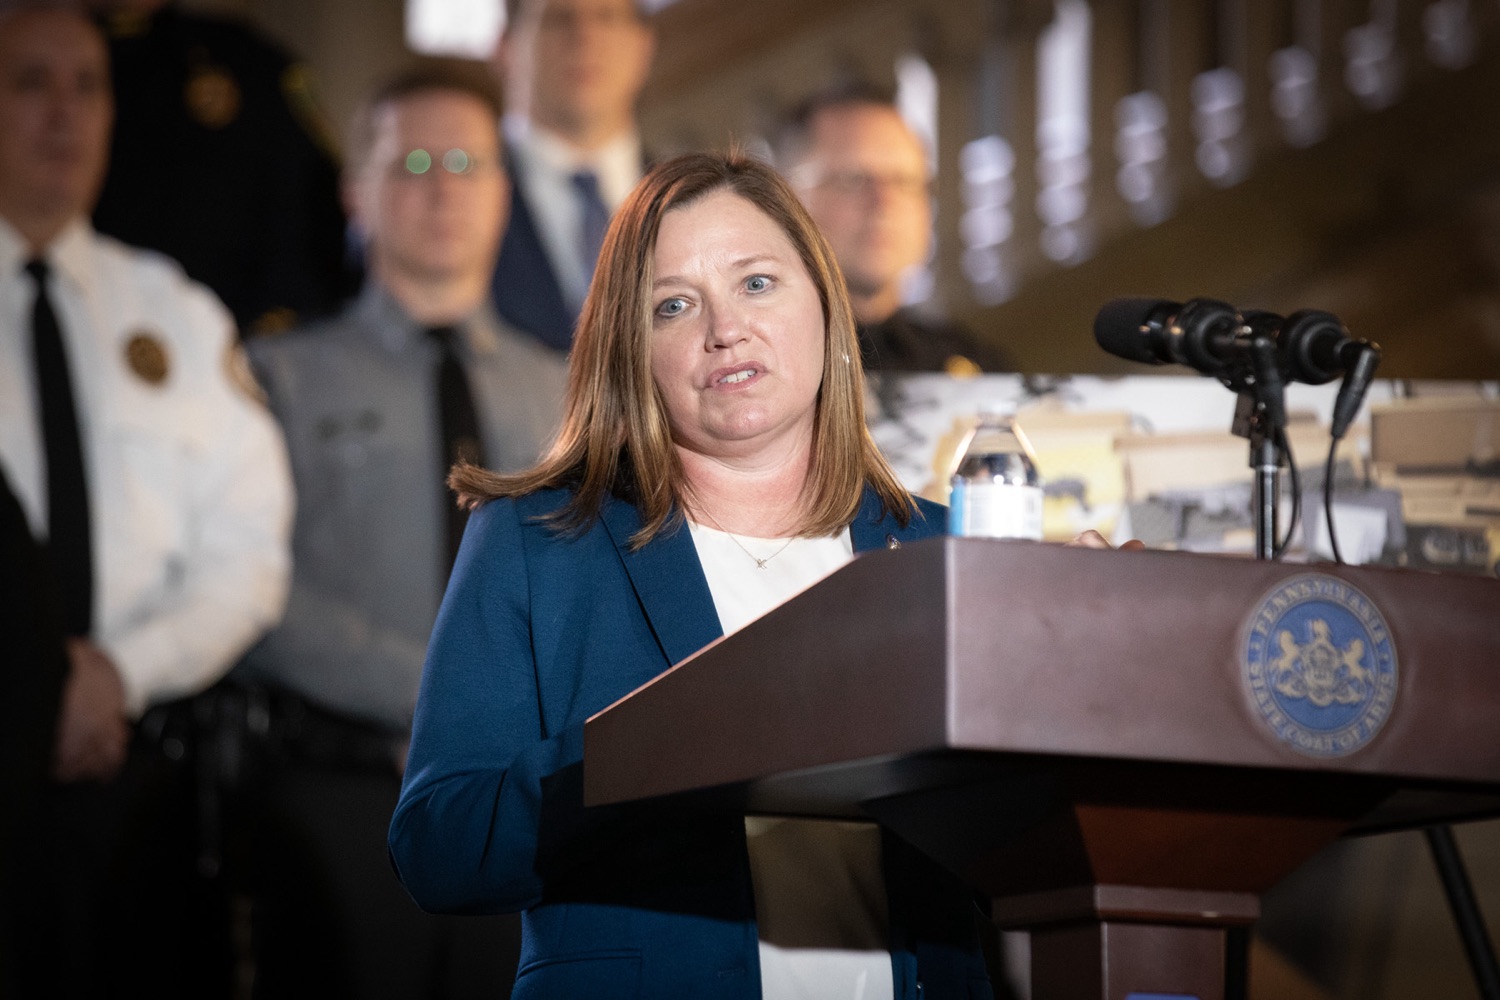 Pennsylvania Attorney General Michelle Henry and Allegheny County District Attorney Stephen Zappala were joined by law enforcement and community collaborators to announce a new public safety initiative in Allegheny County. Pictured here is Michelle Henry, Attorney General of Pennsylvania, delivering remarks during the event. Pittsburgh, Pennsylvania.<br><a href="https://filesource.amperwave.net/commonwealthofpa/photo/24297_oag_publicSafety_JAP_11.jpg" target="_blank">⇣ Download Photo</a>